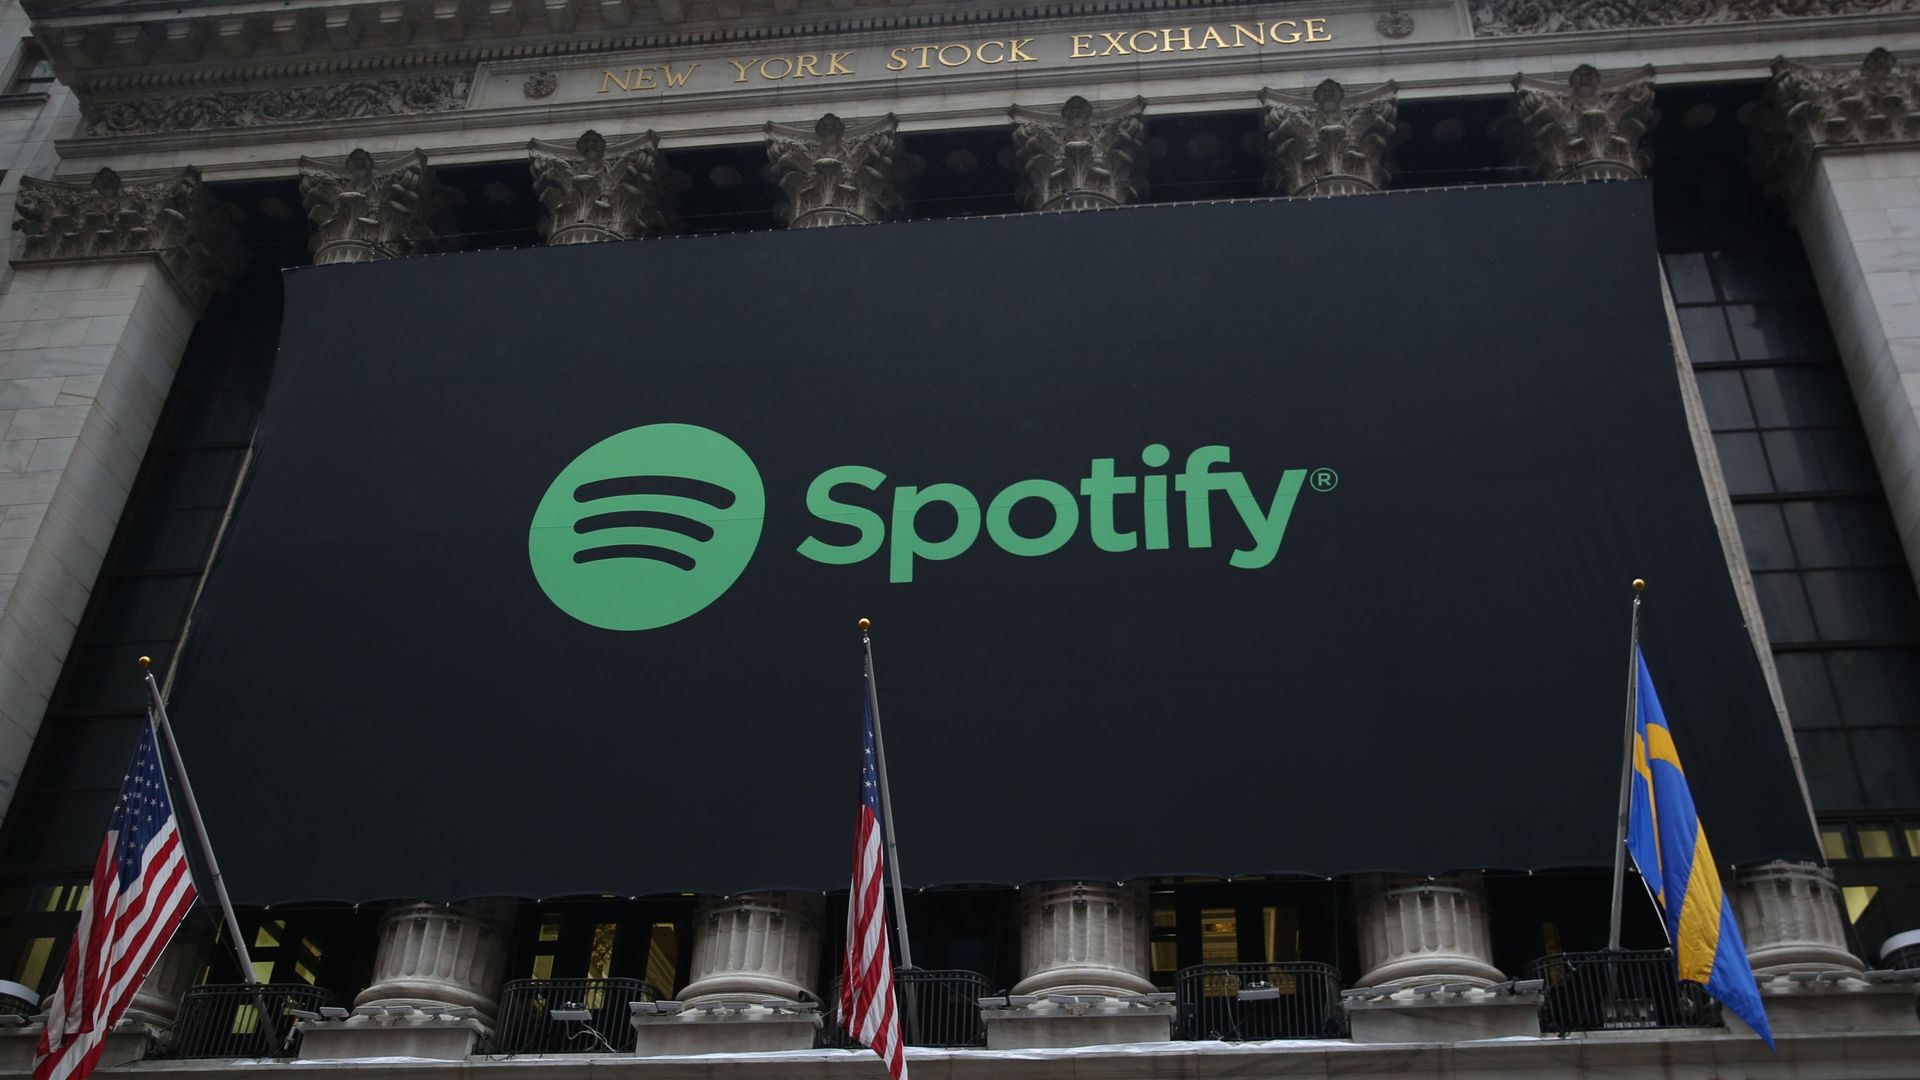 Spotify logo above the NYSE.